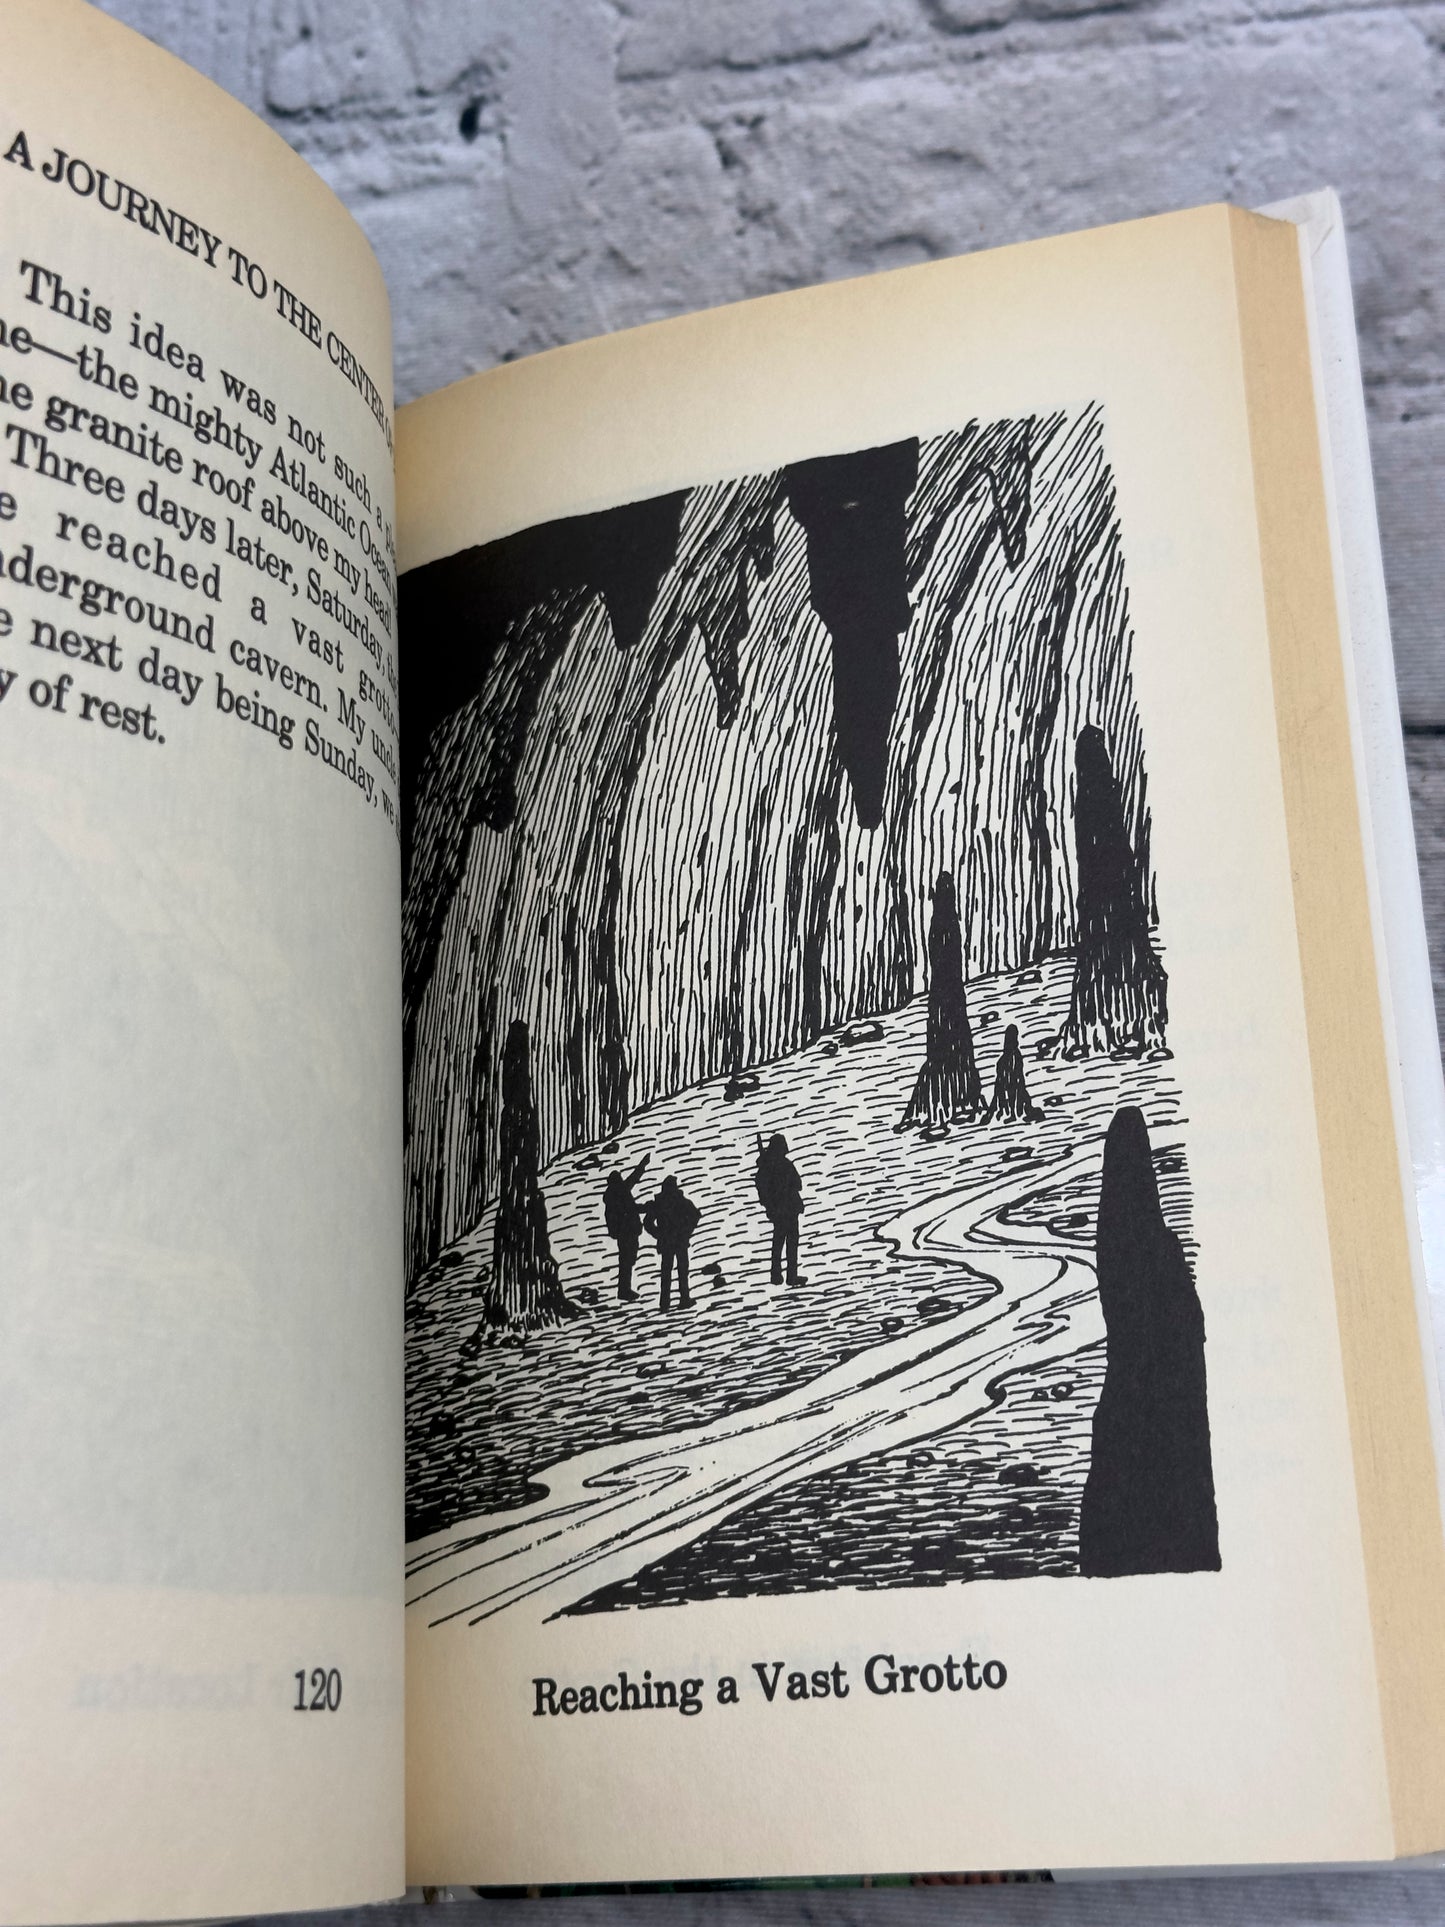 A Journey to the Center of the Earth by Jules Verne Illustrated Classics [1990]